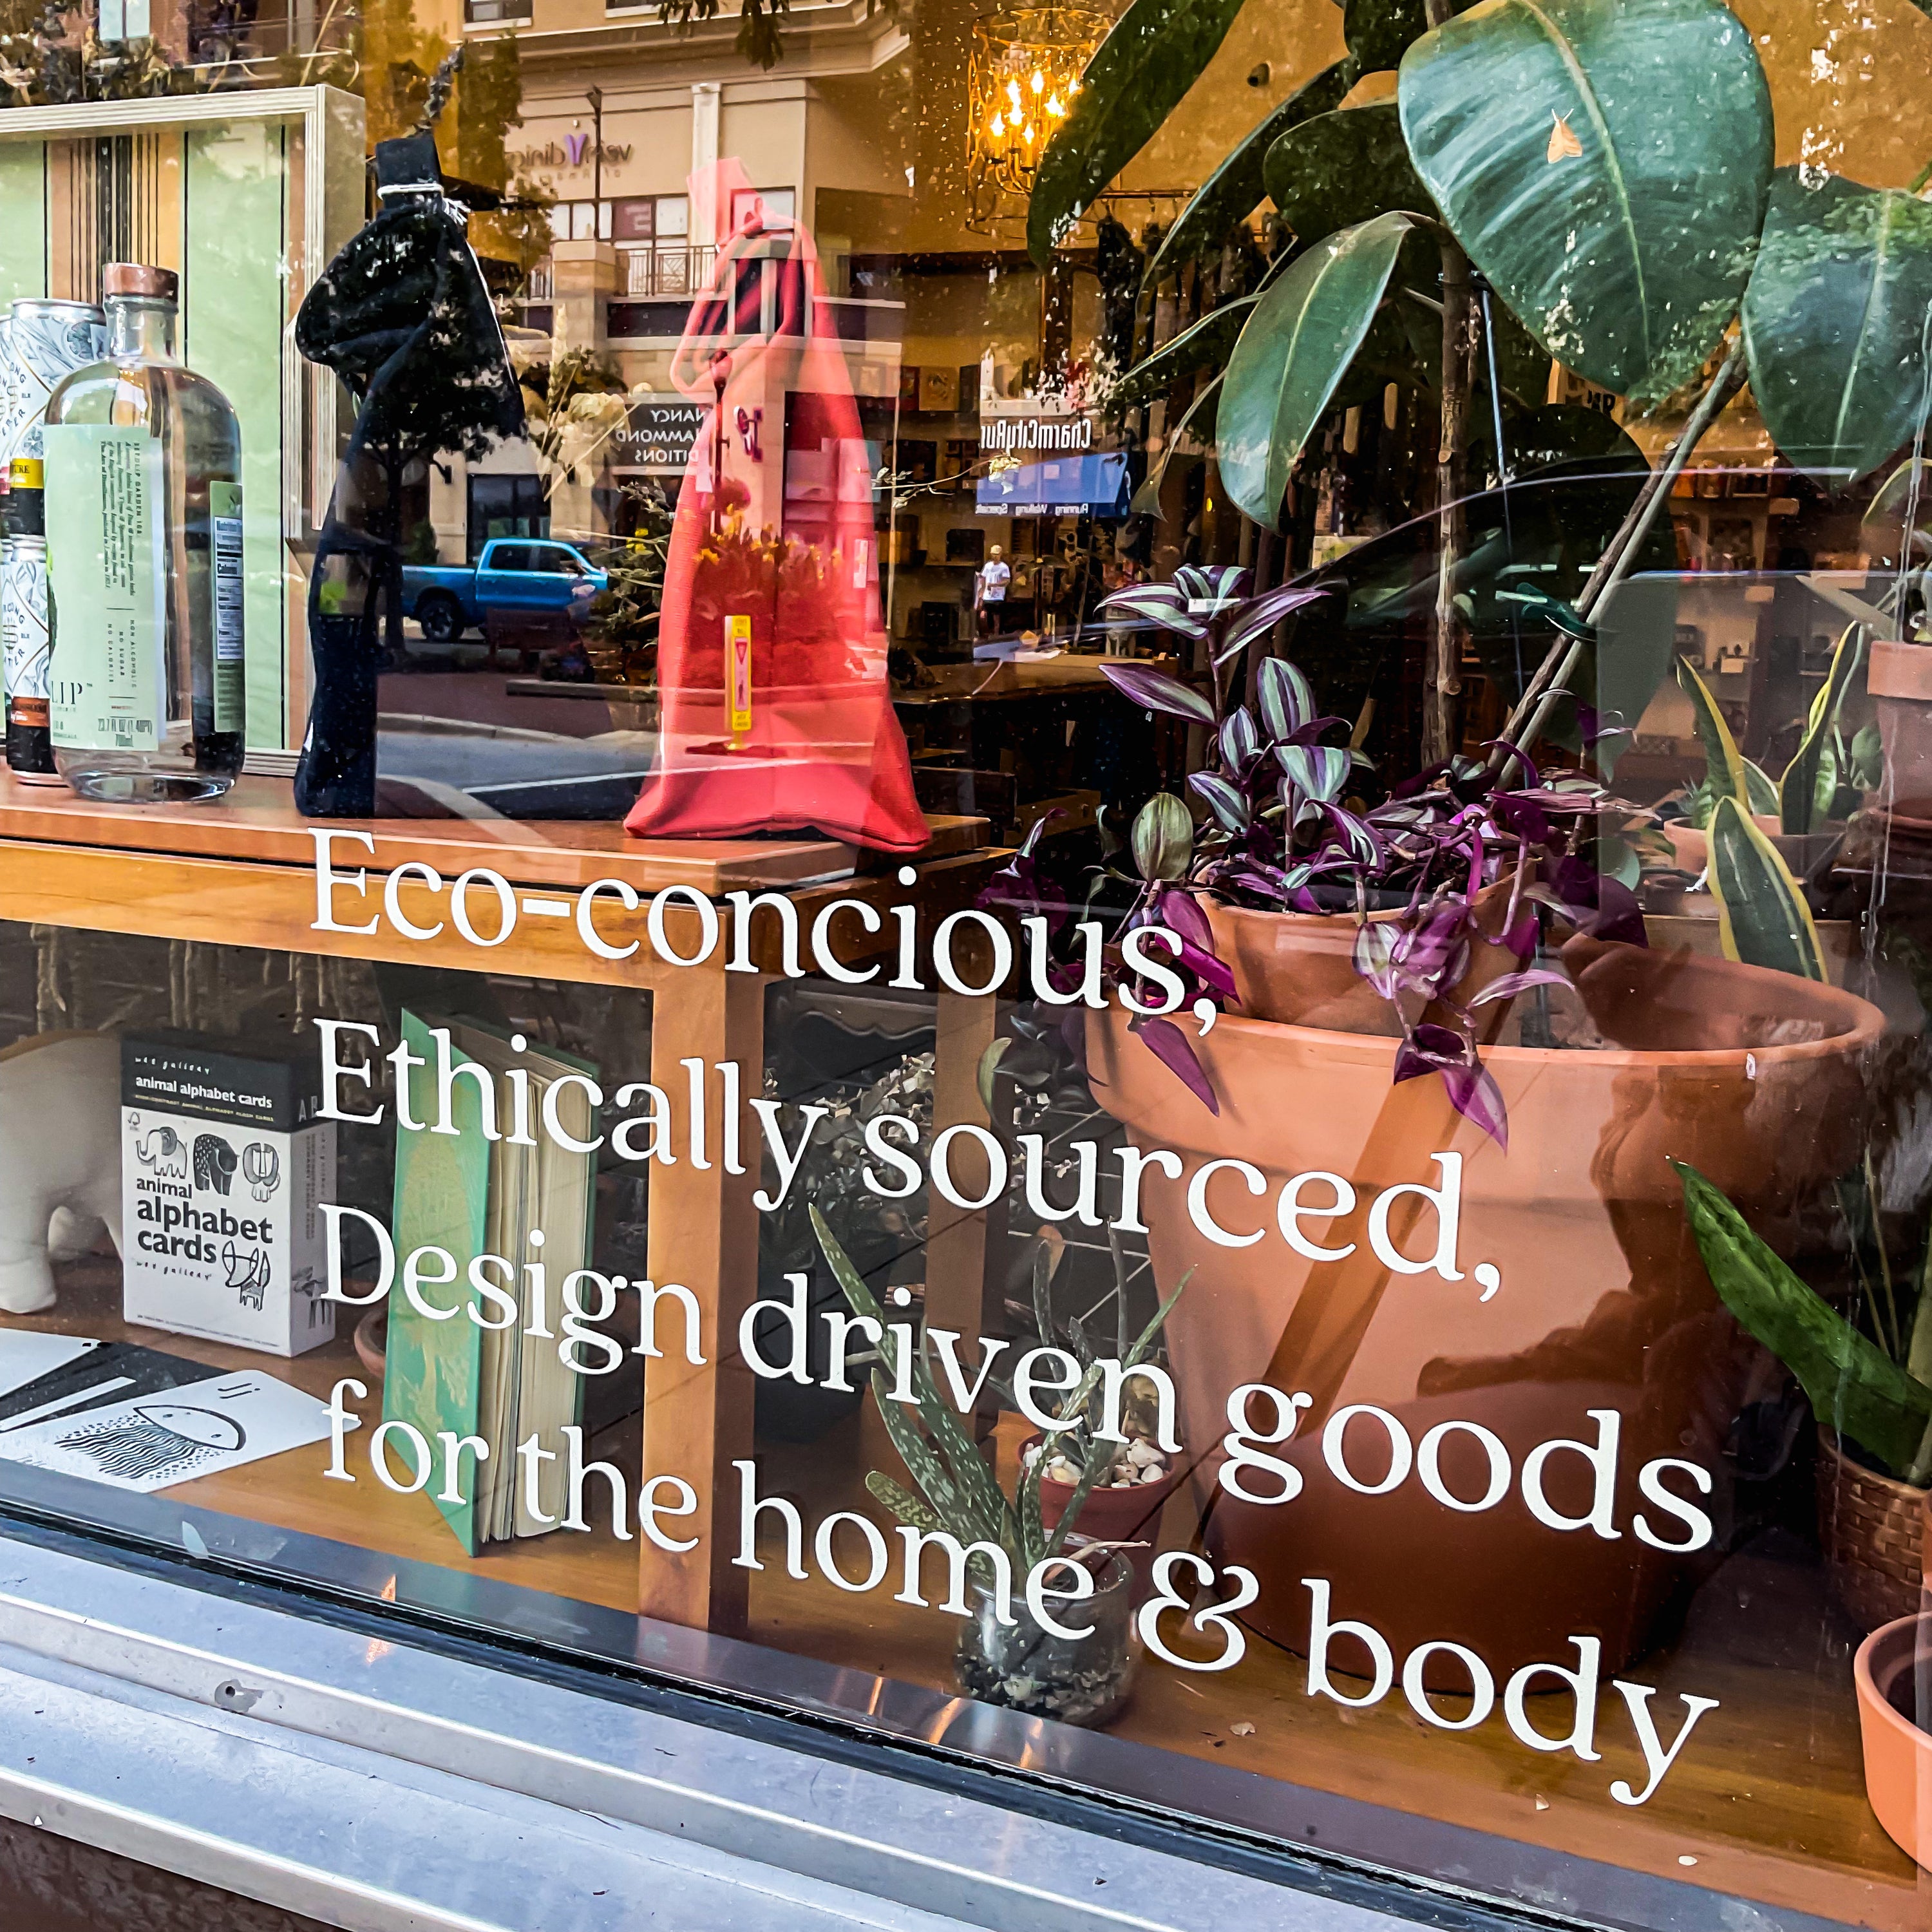 Store front window text: "Eco-conscious, Ethically sourced, Design-Driven Goods for the home & body"